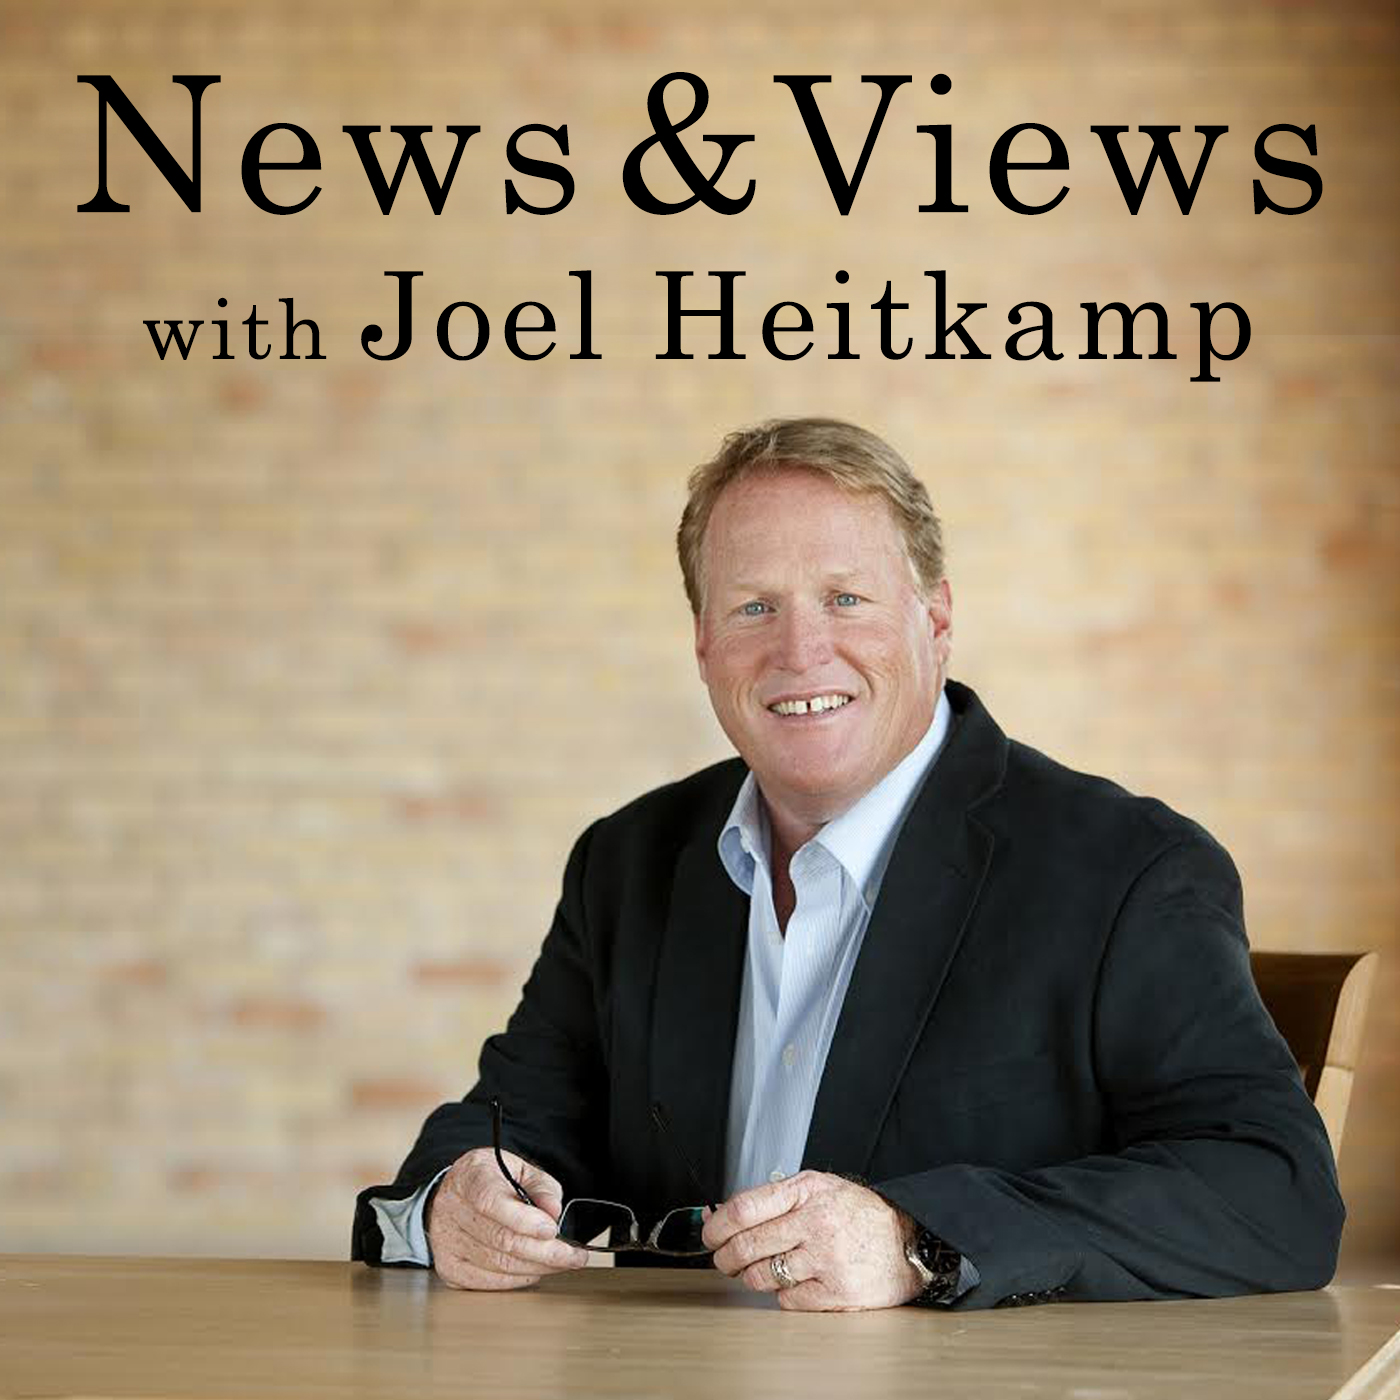 Jesse Wegman and Joel Heitkamp talk about the lack of shame at the Supreme Court